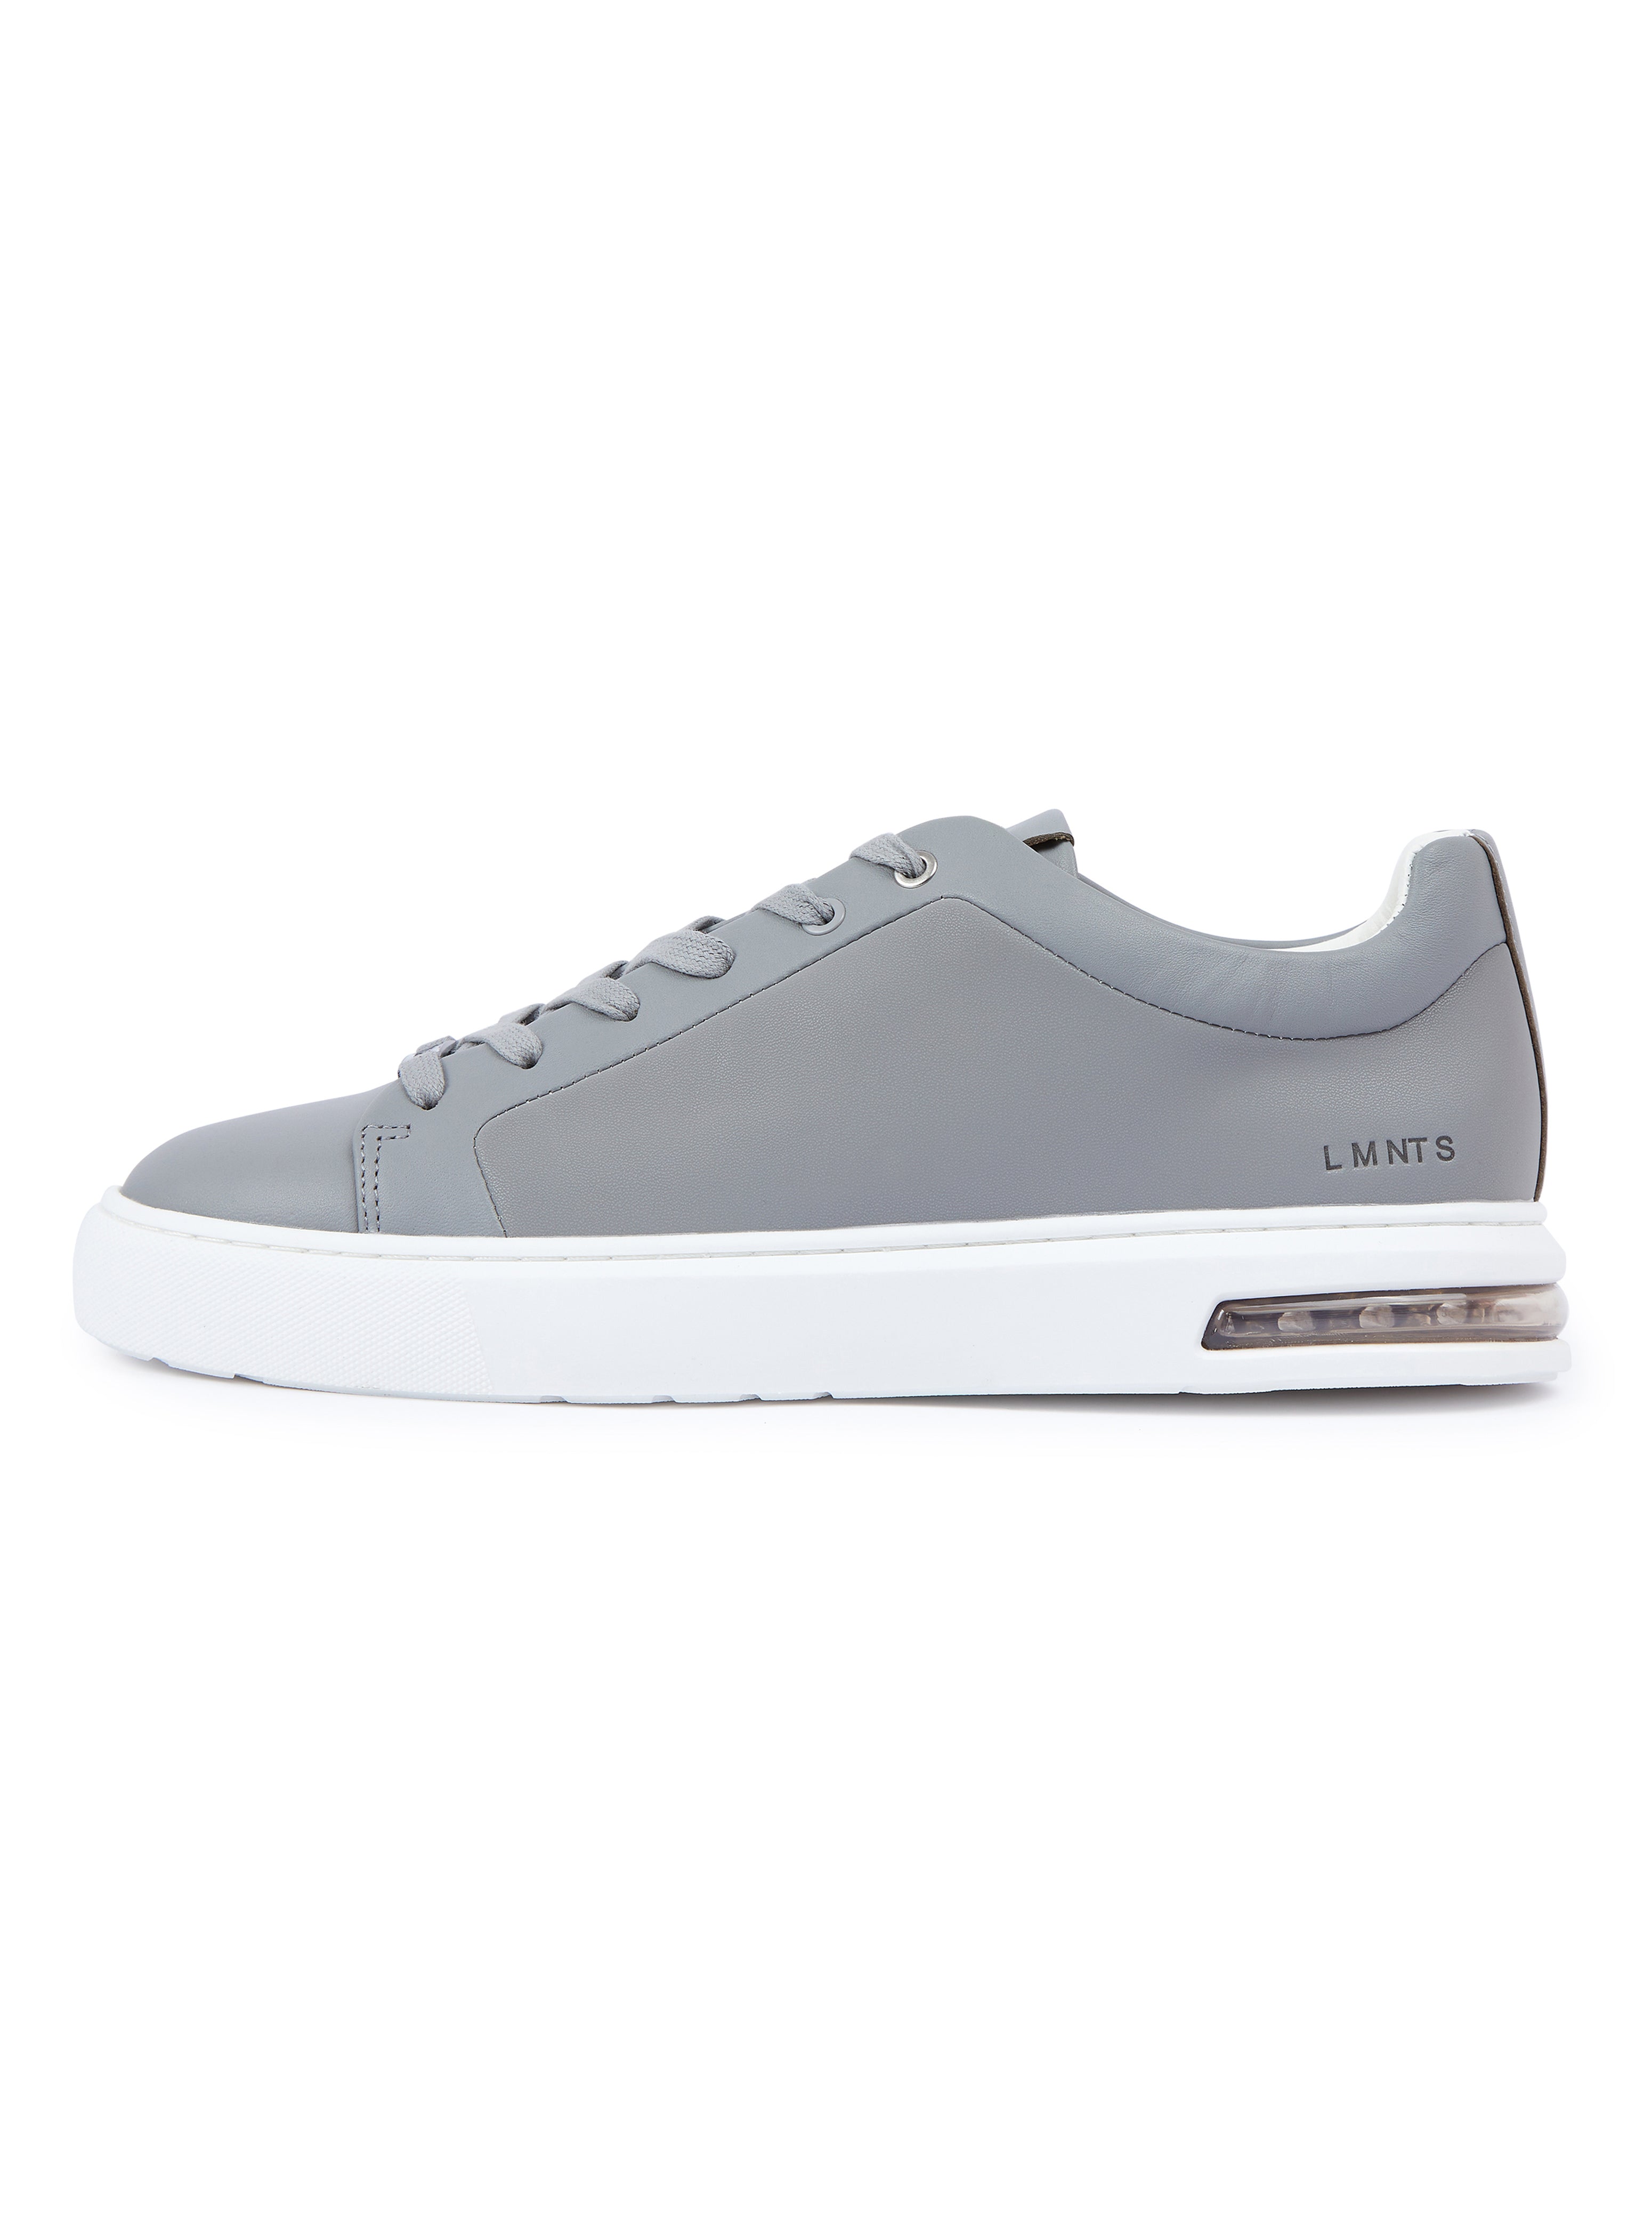 Load image into Gallery viewer, LMNTS Lunar Low Grey Trainer
